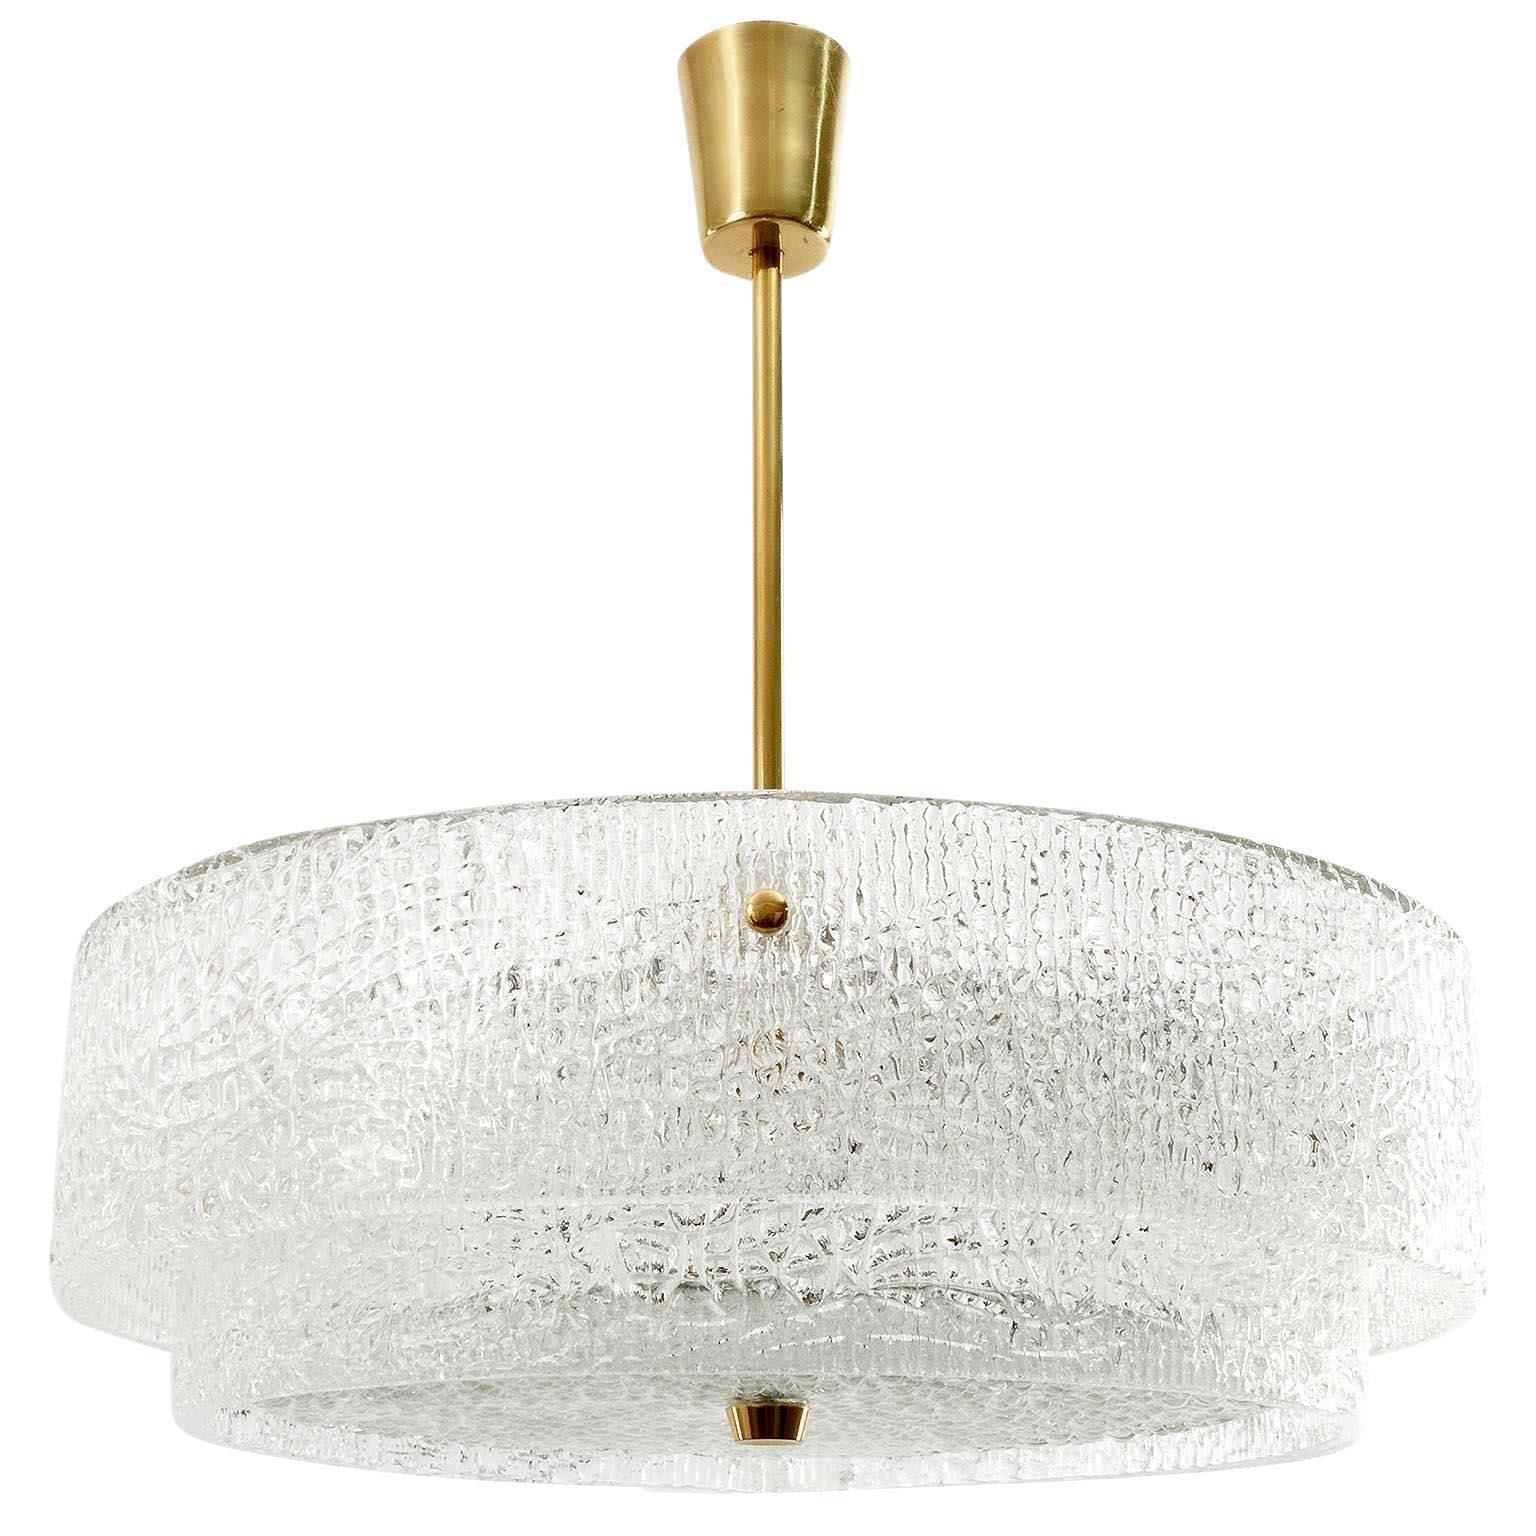 A beautiful textured glass and brass light fixture by J.T. Kalmar, Vienna Austria, manufactured in midcentury, circa 1960 (late 1950s or early 1960s).
Two round glass belts are mounted on a white painted metal frame. A round glass disk is fixed with